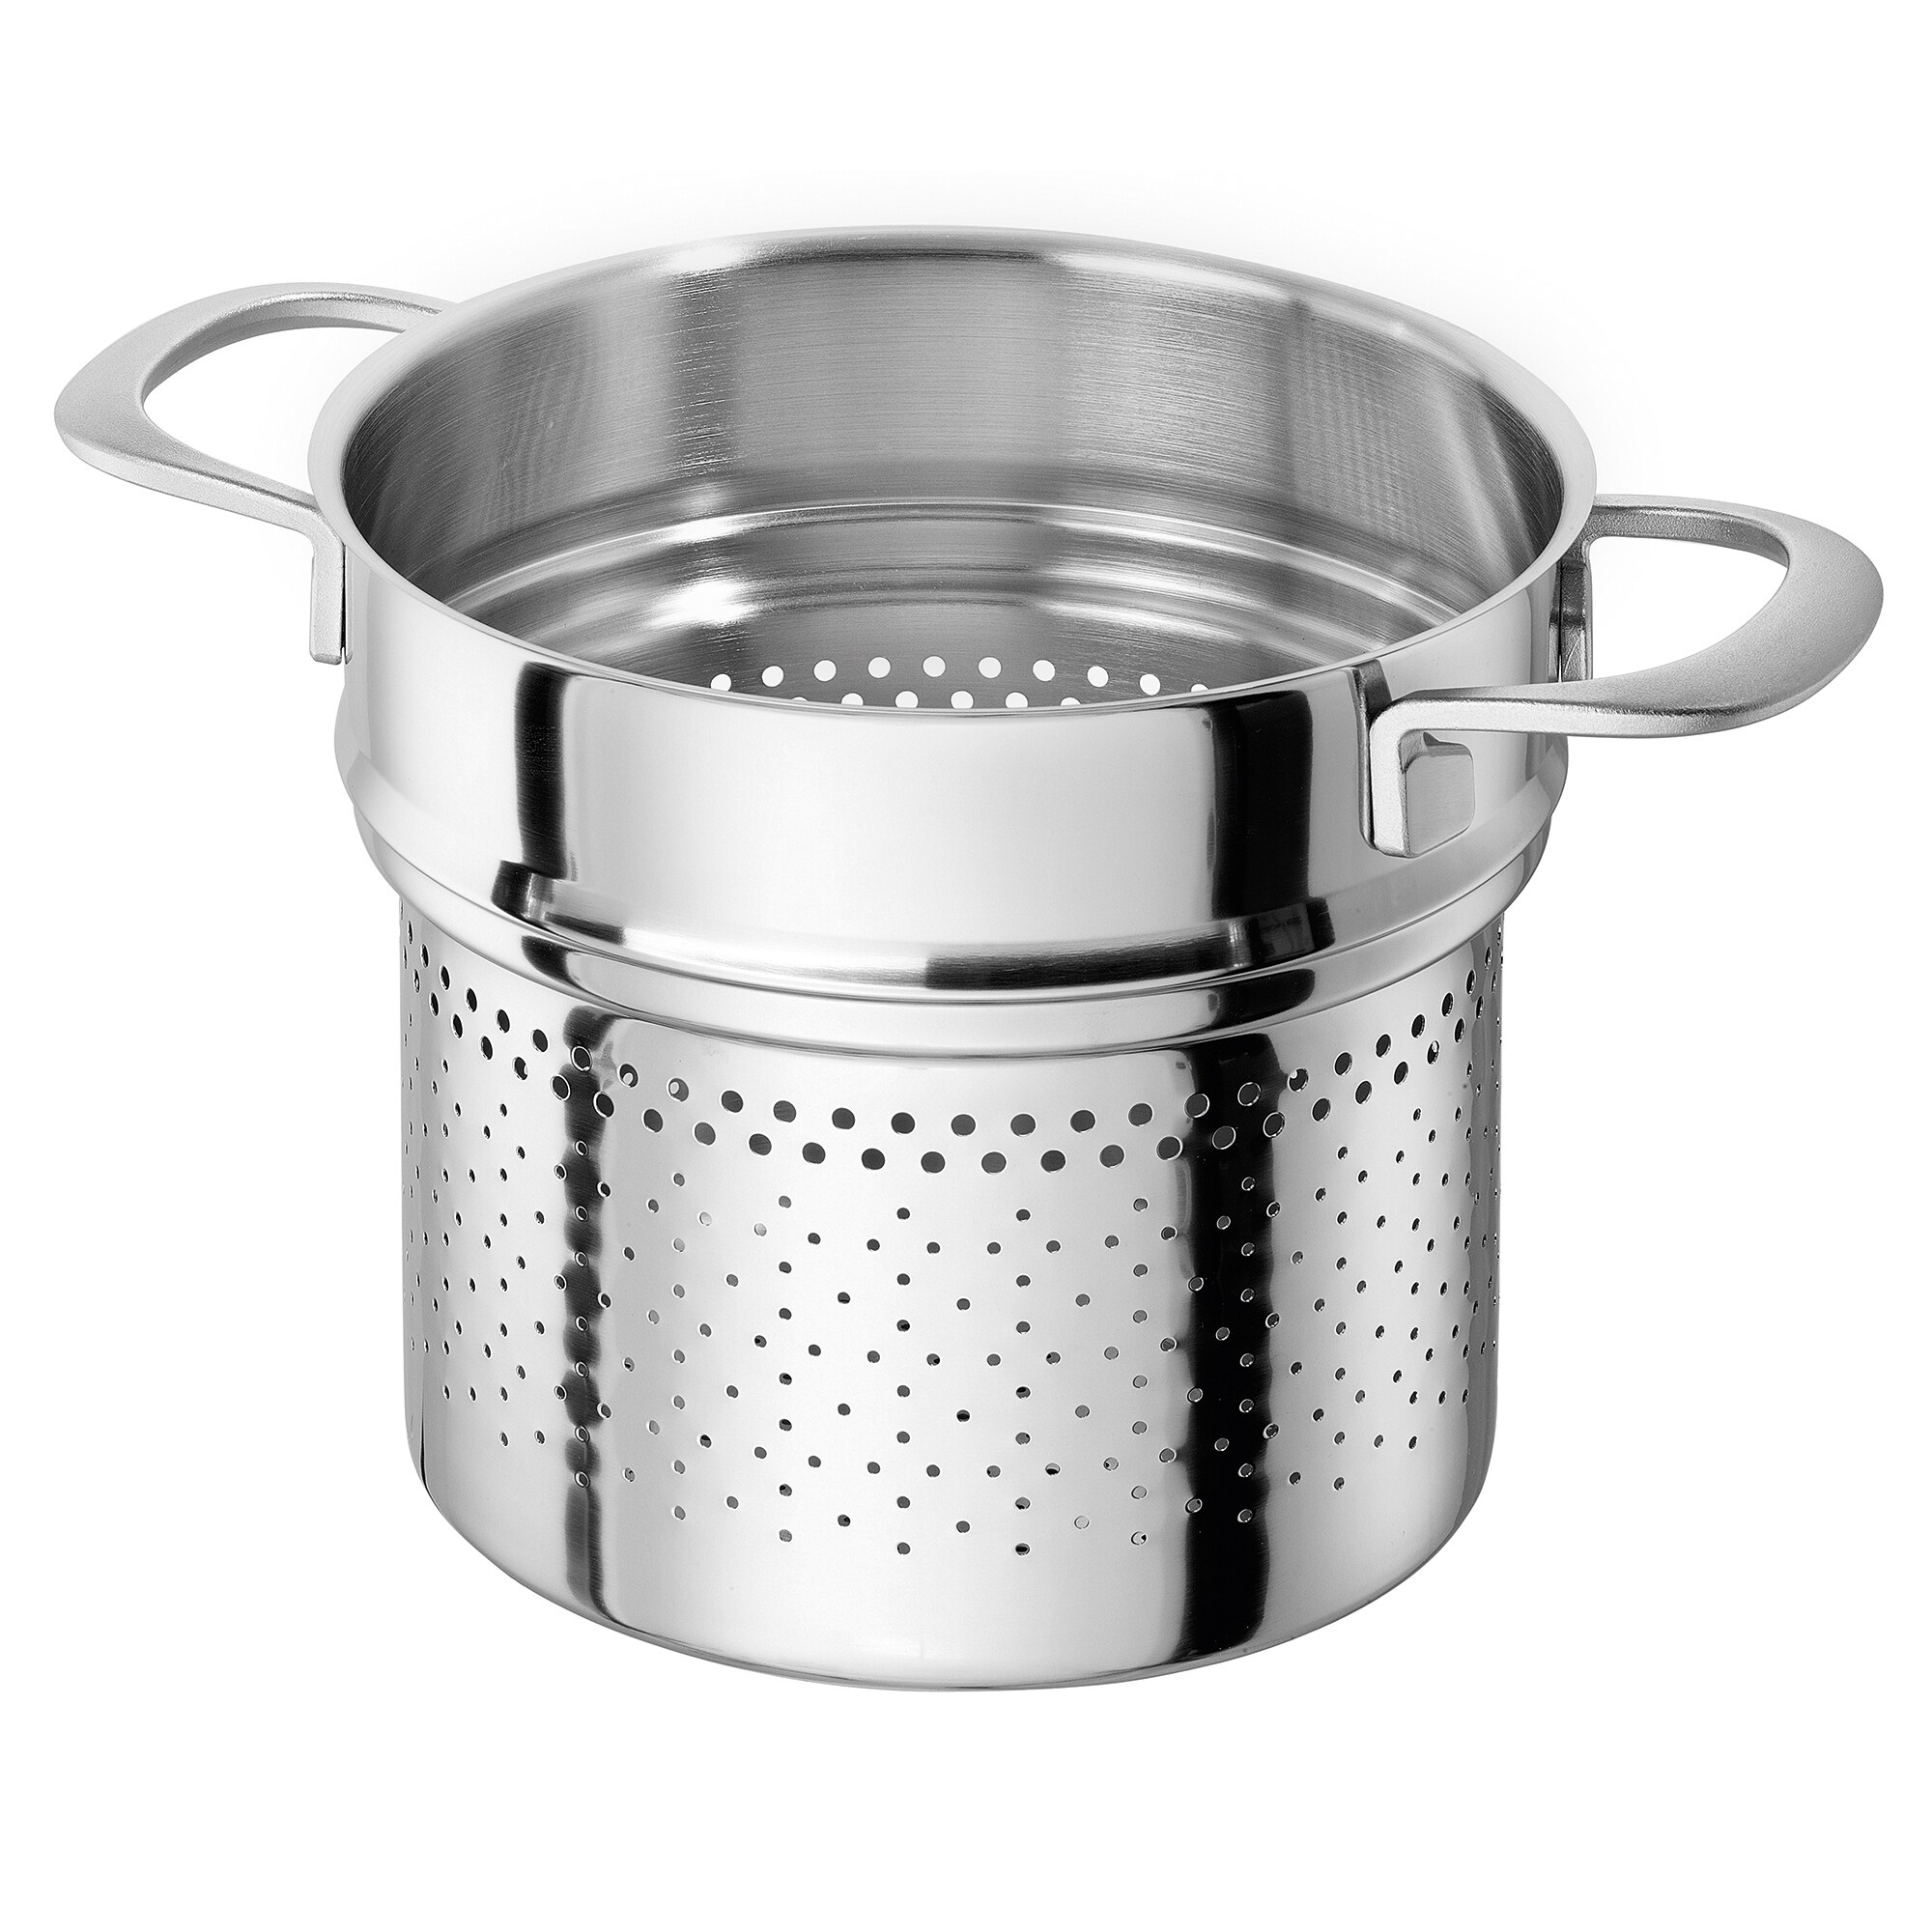 https://ak1.ostkcdn.com/images/products/is/images/direct/a8a015cfd6e3b1e701e500f43240979b4b54189c/ZWILLING-Sensation-5-ply-8-qt-Stainless-Steel-Pasta-Insert-%28Fits-8-qt-Stock-Pot%29.jpg